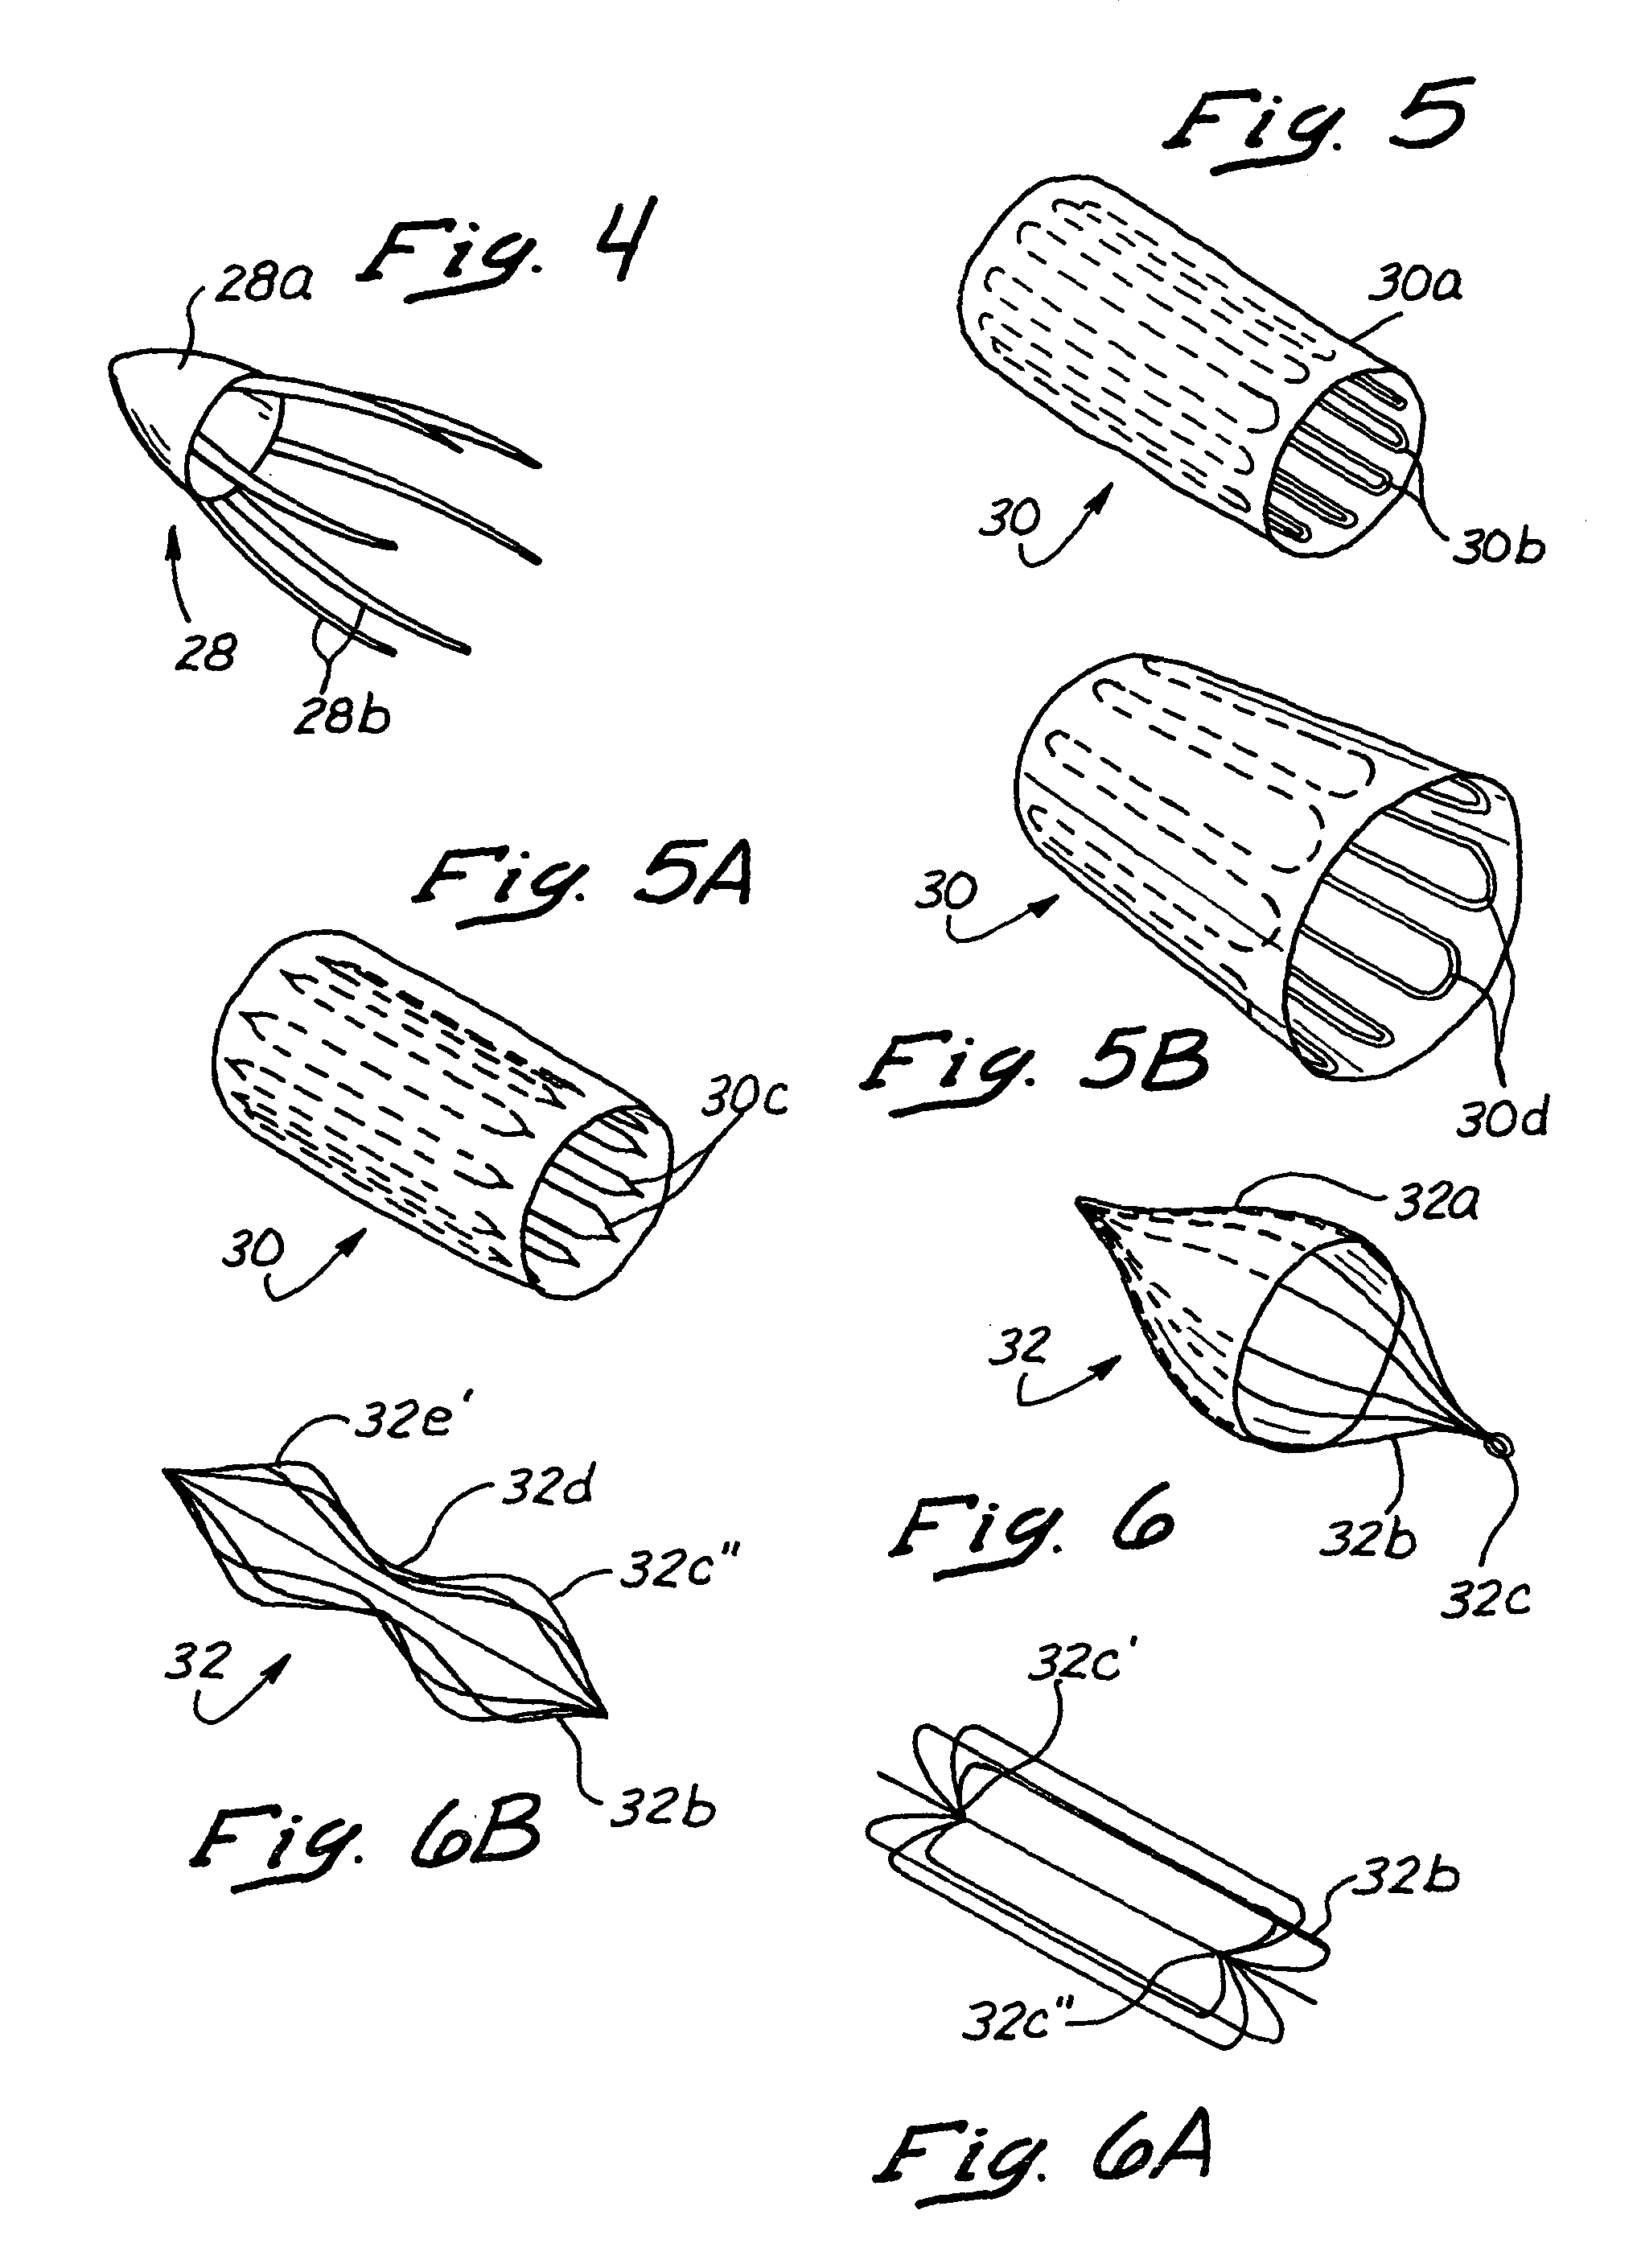 Methods and apparatus for blocking flow through blood vessels